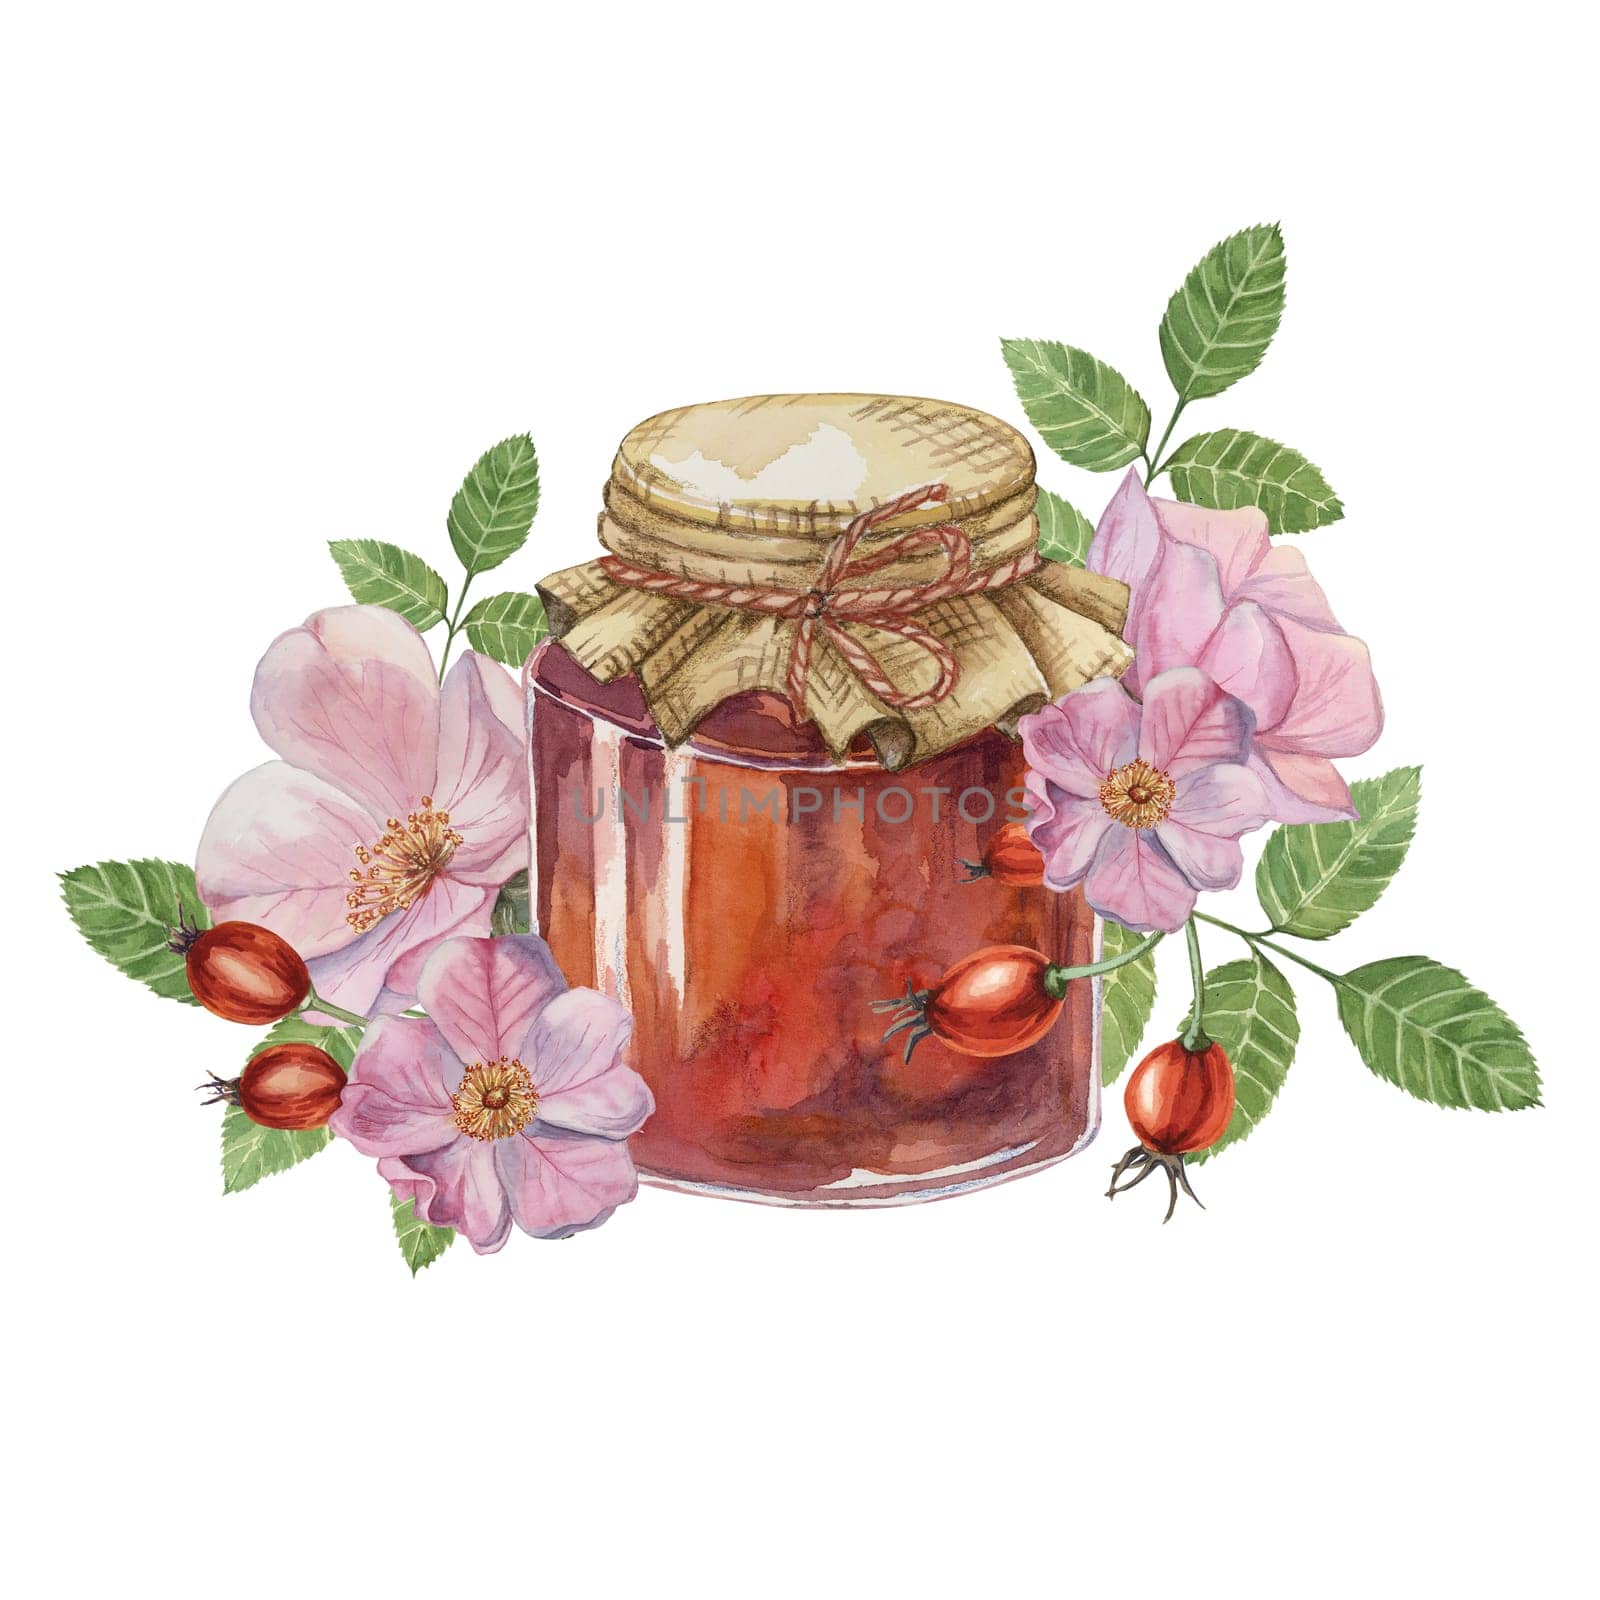 Rose hip jam in glass jar with dogrose briar flowers and leaves. Swiss forest berry jelly watercolor illustration for printing, packaging, cards by Fofito